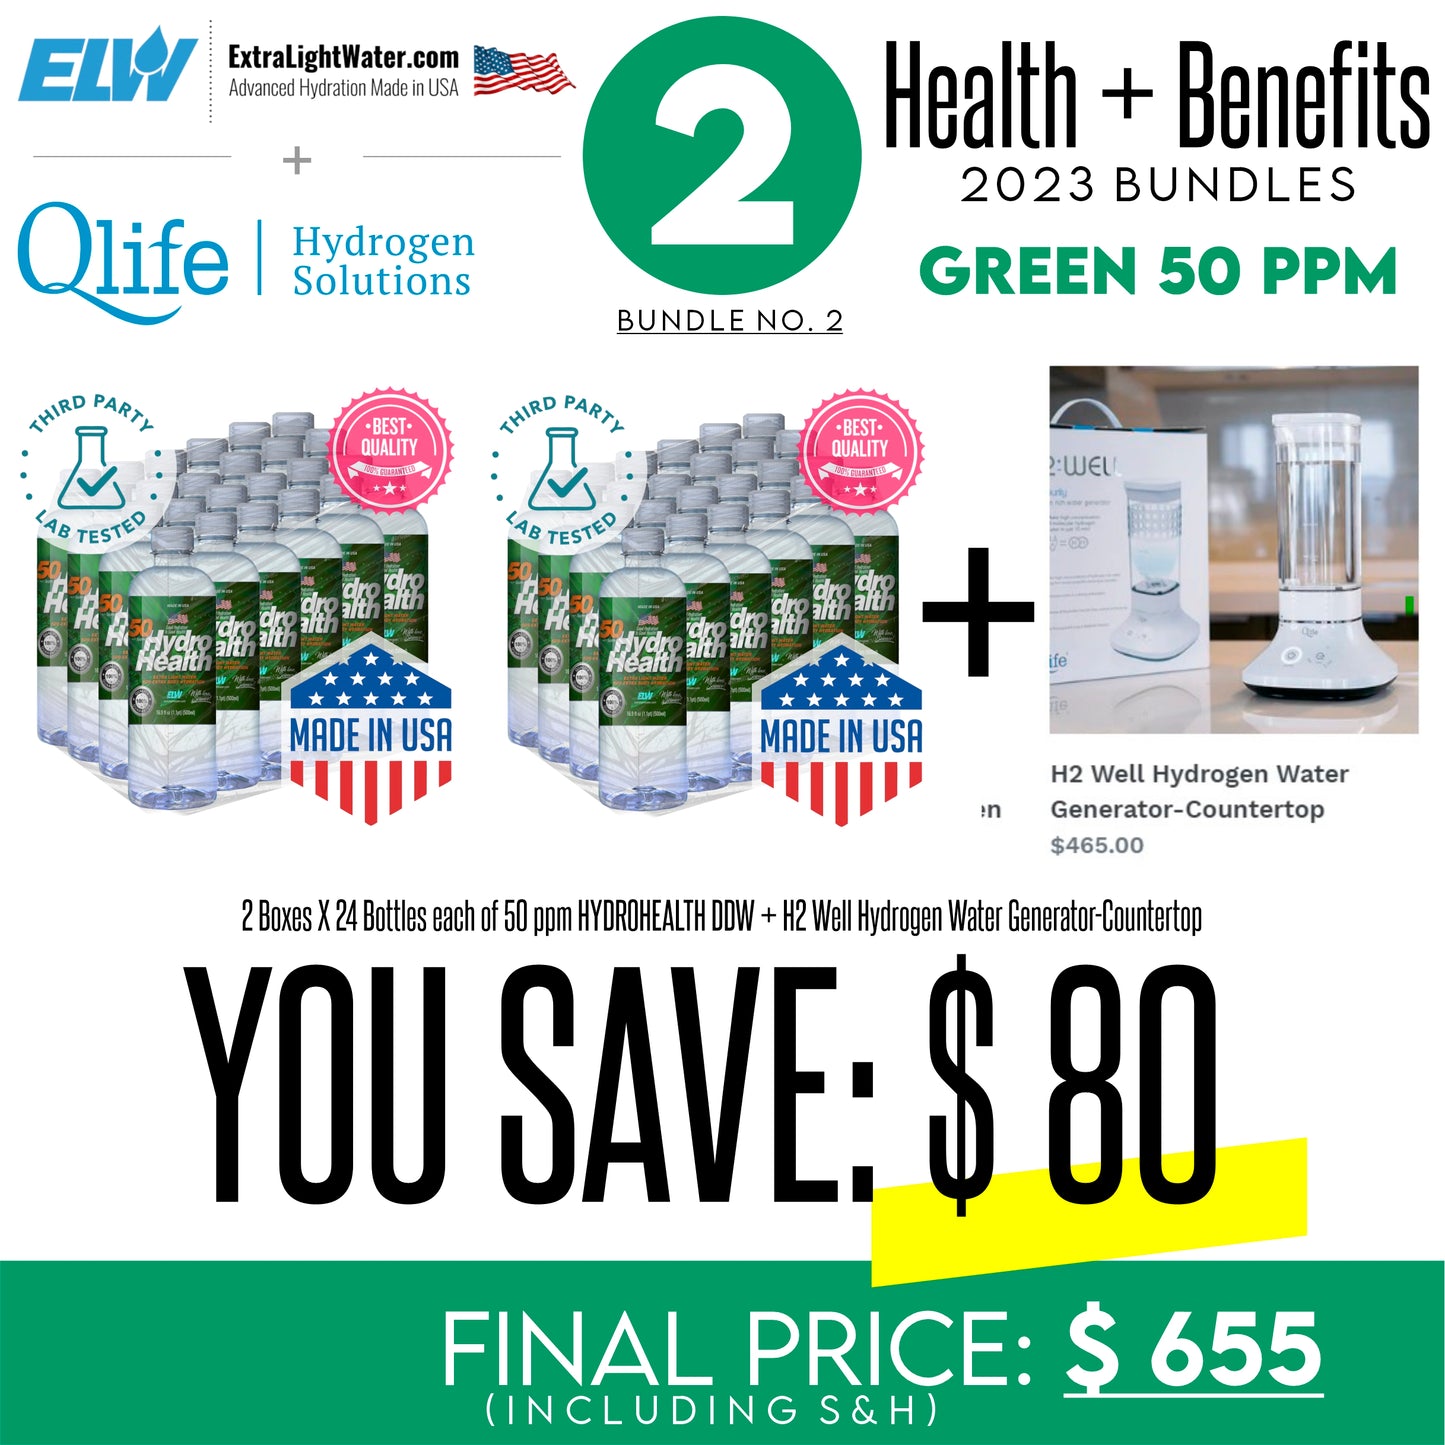 ELW-H2WELL-BUNDLE 50 (2 x boxes of 50 ppm water and 1 x  H2 Well Hydrogen Water Generator-Countertop)